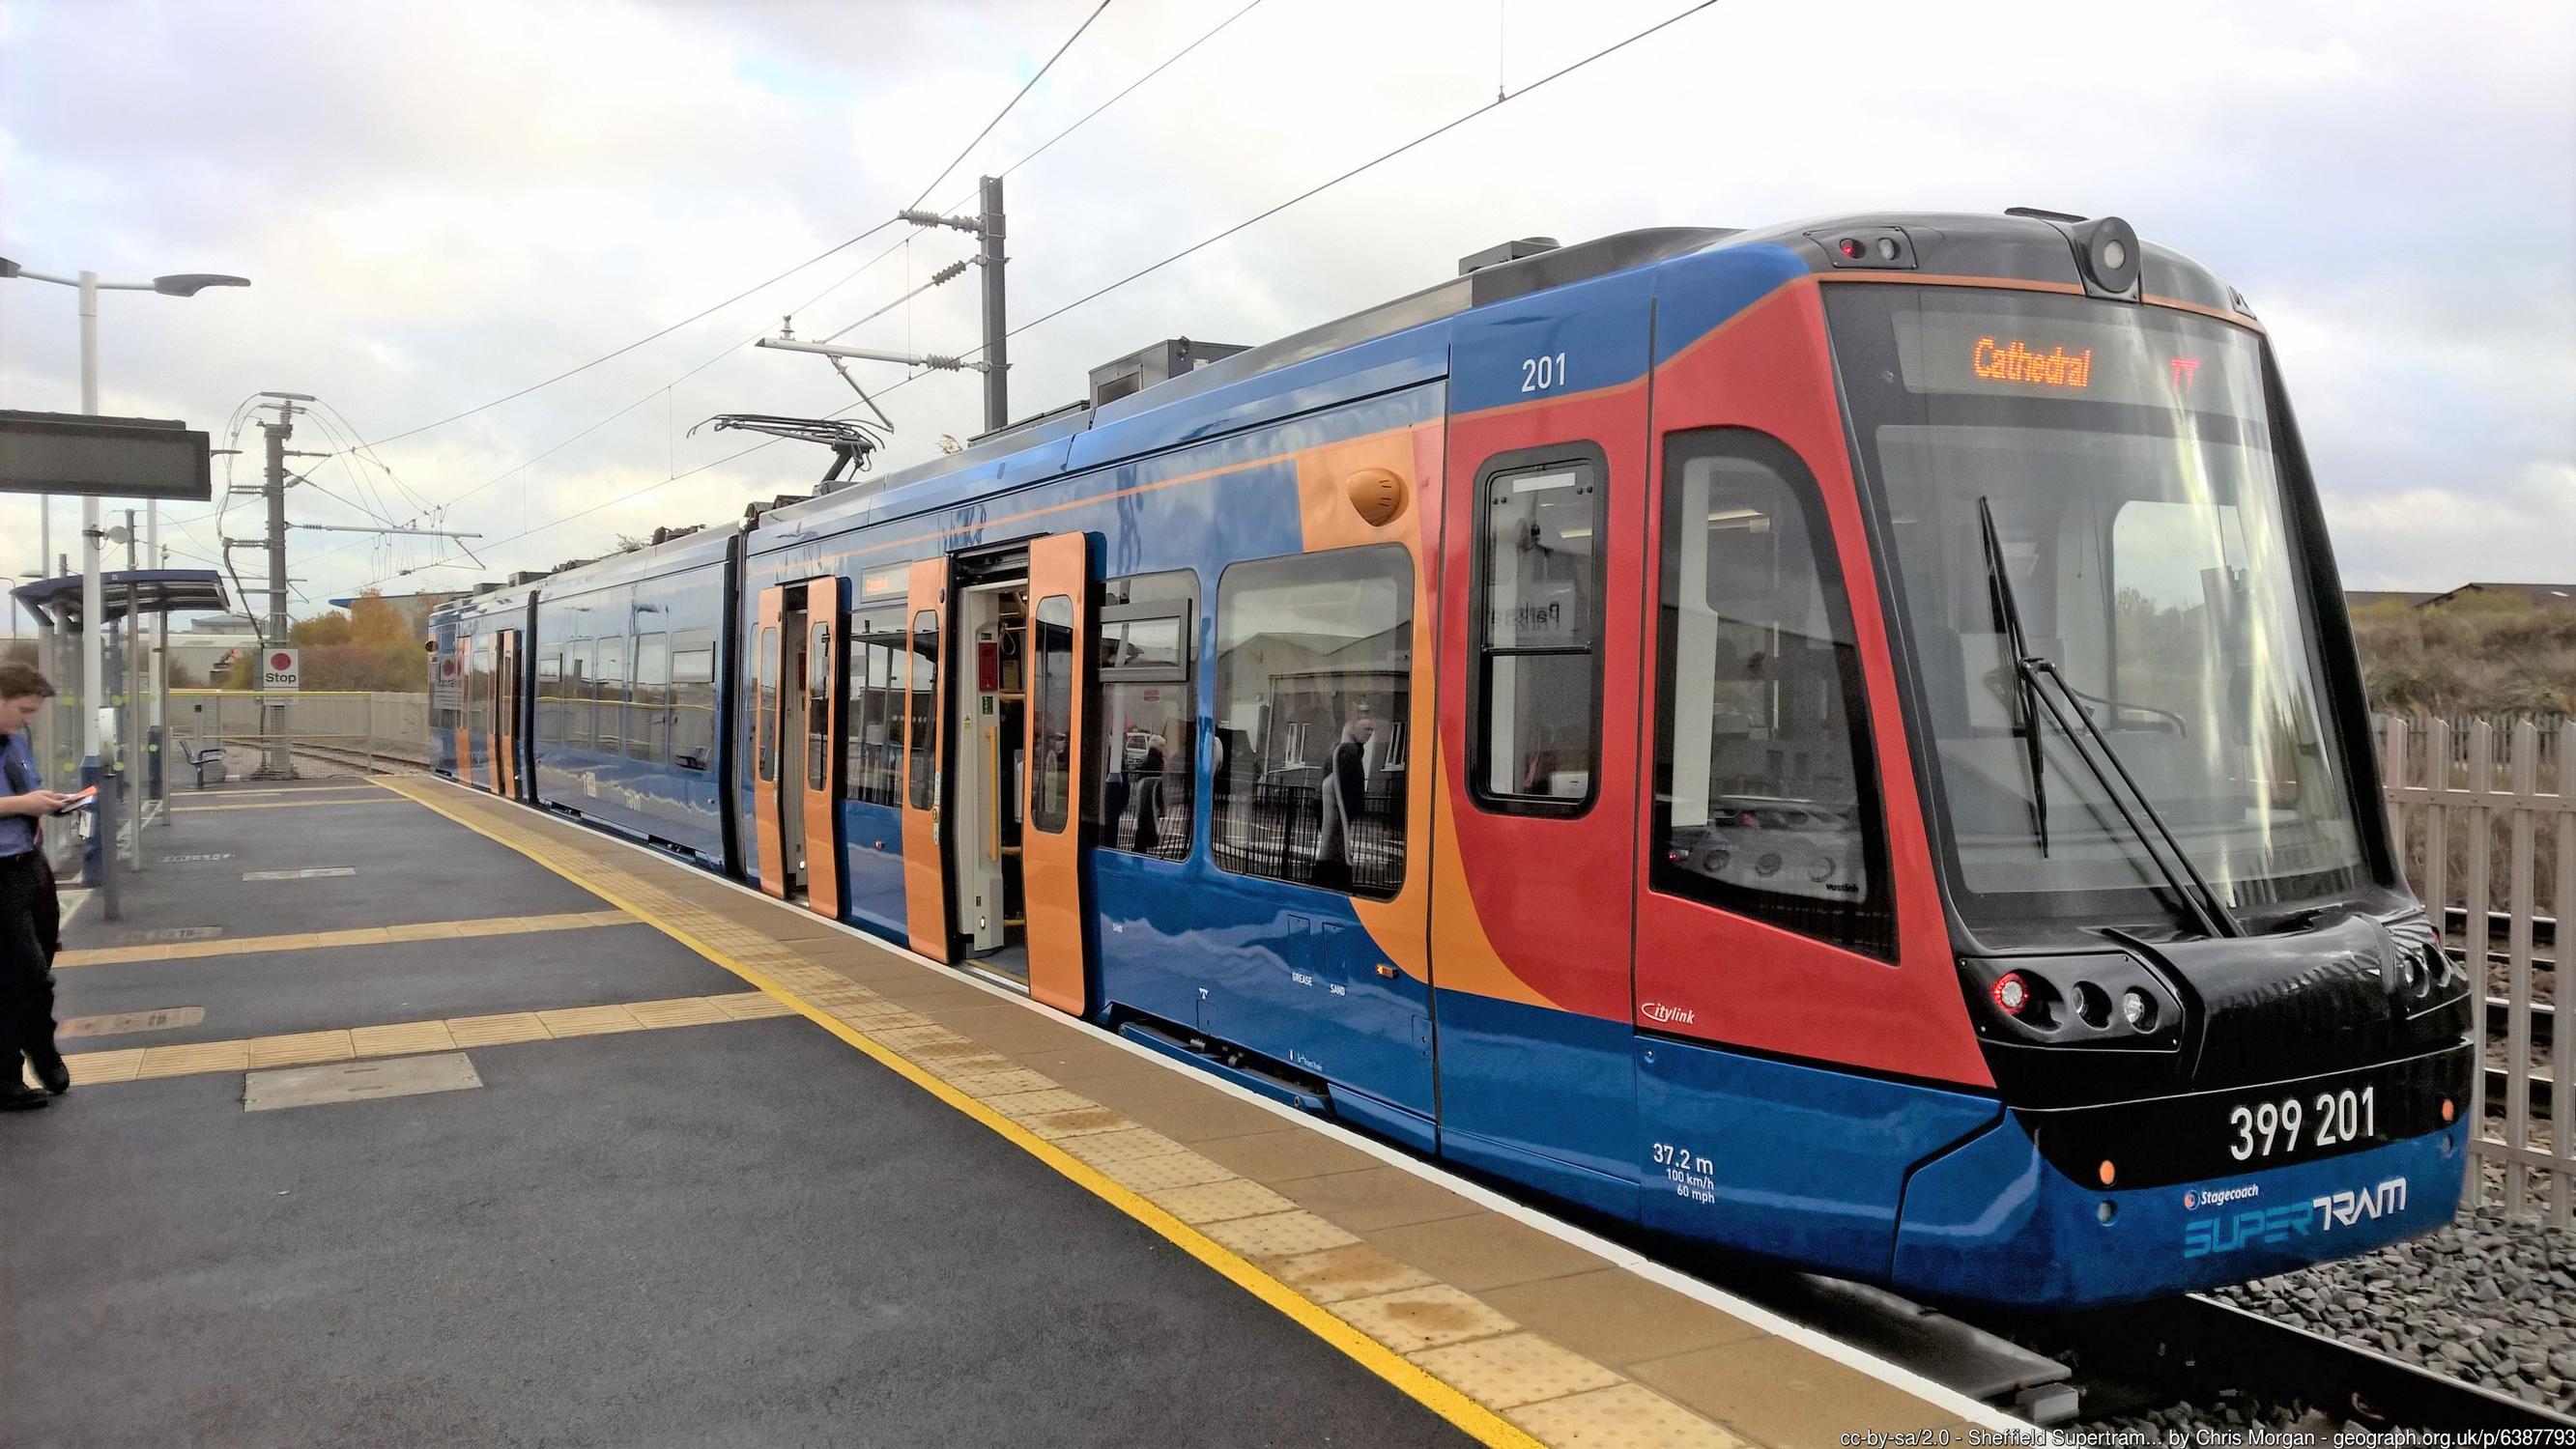 More tram-trains could relieve Sheffield’s railways